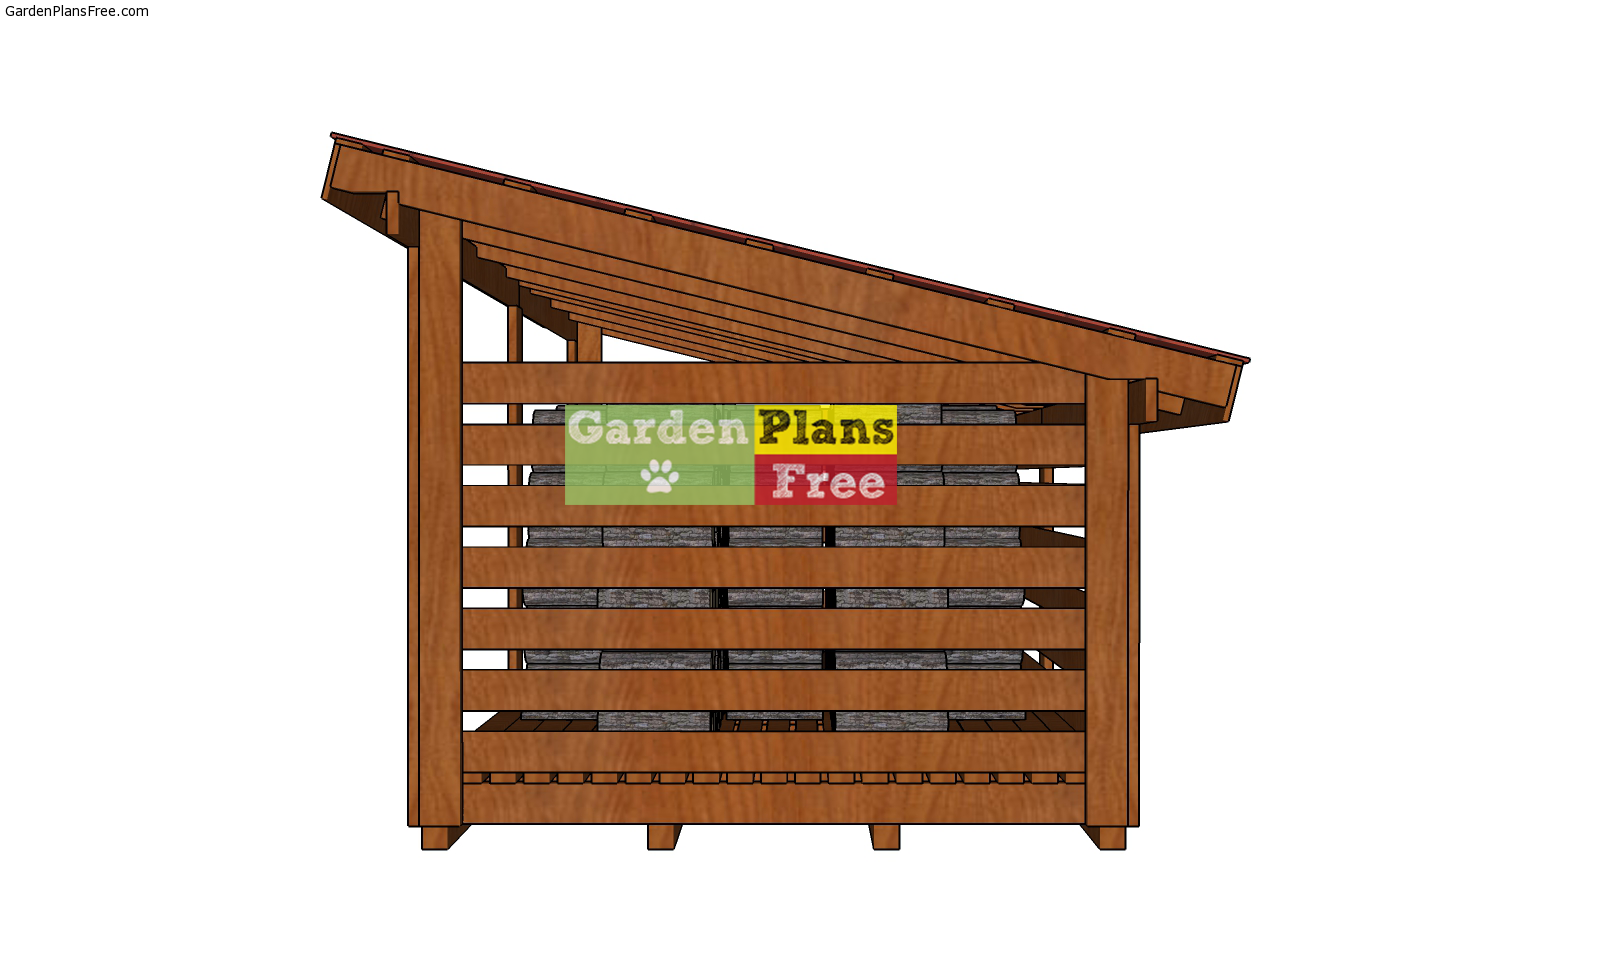 8x12 Firewood Shed Plans - 4 Cord Wood Storage | Free Garden Plans ...